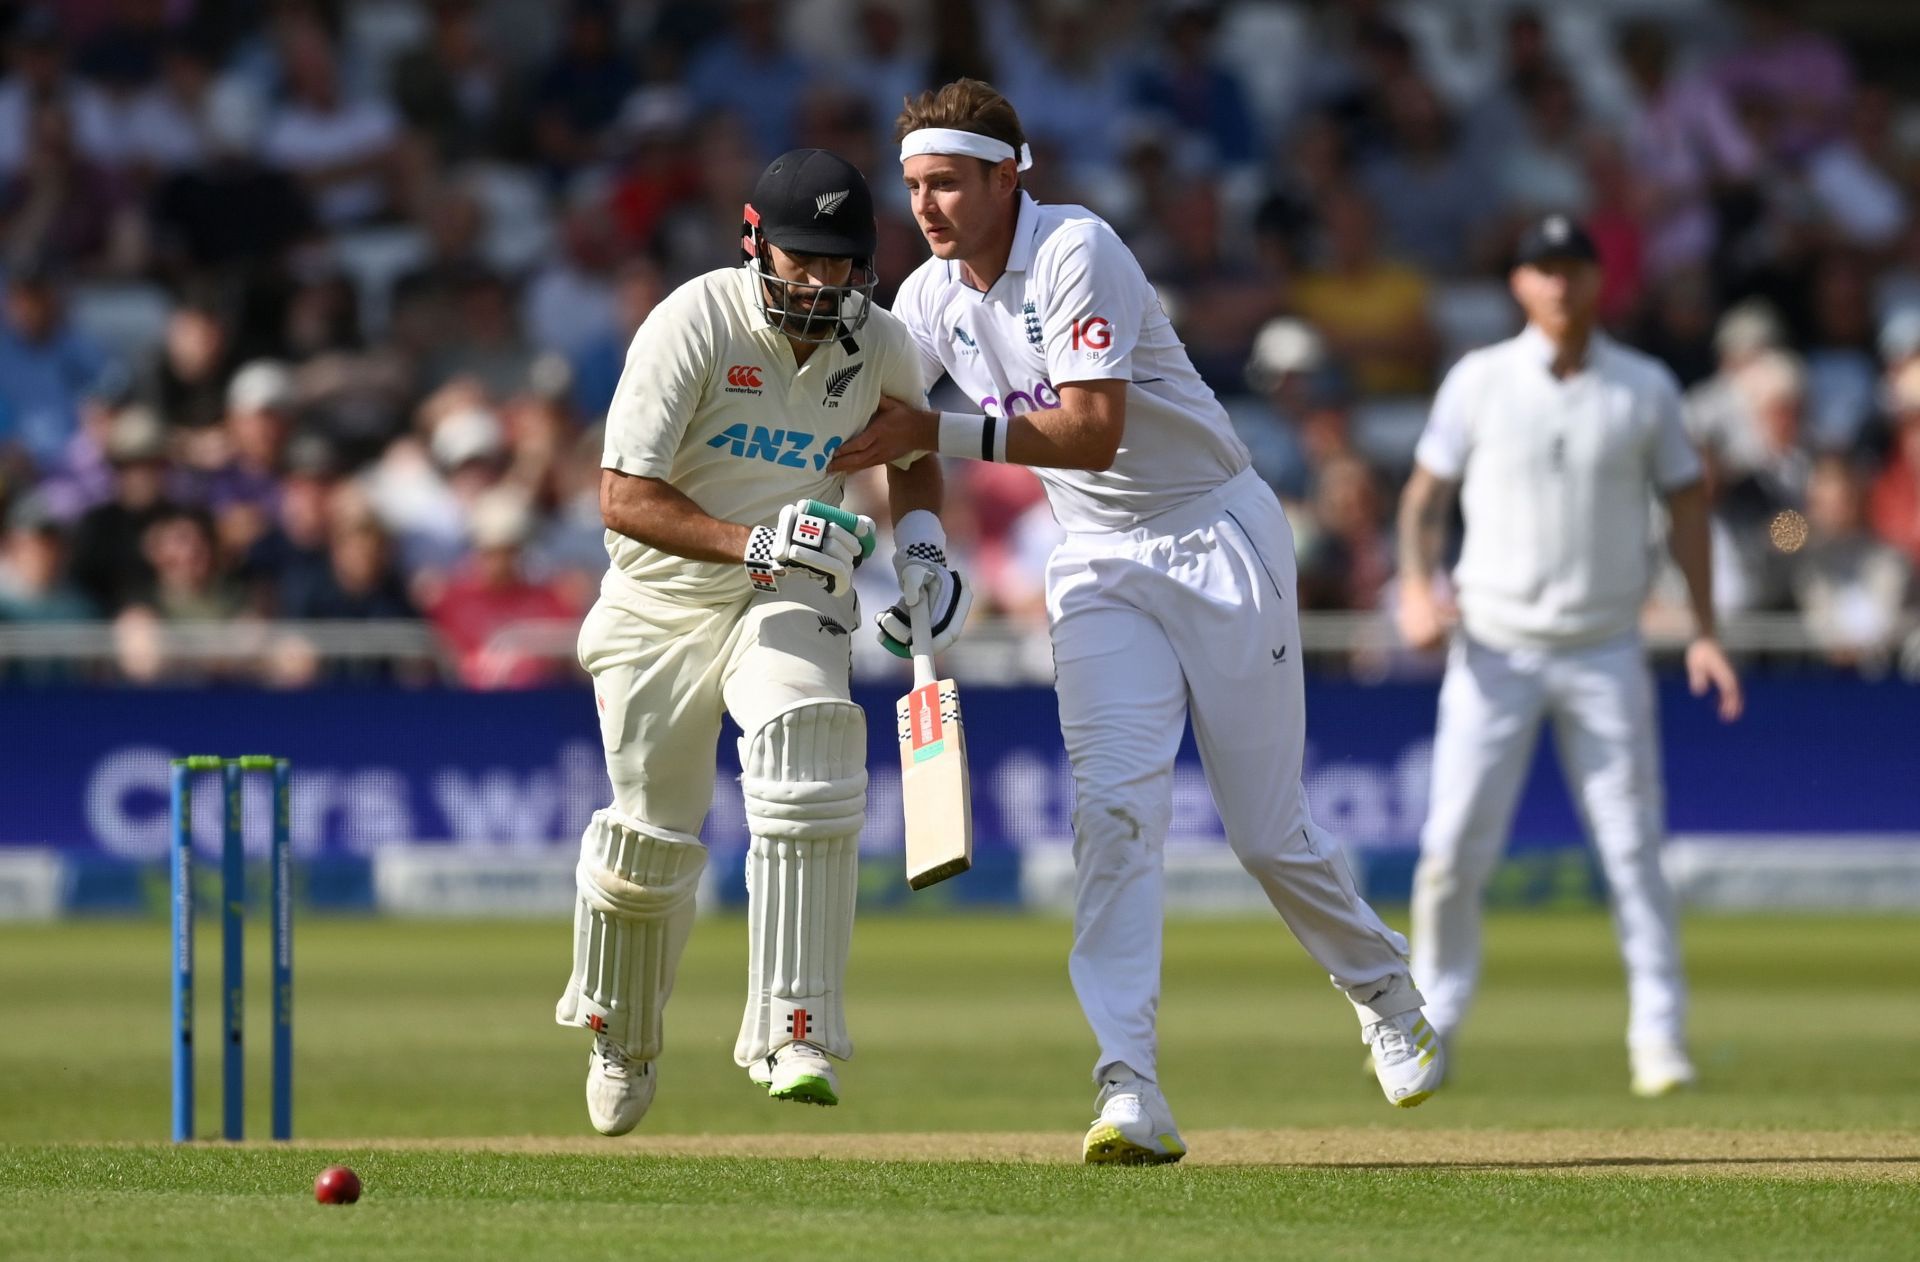 Stuart Broad (right) collides with Daryl Mitchell during the Trent Bridge Test. Pic: Getty Images